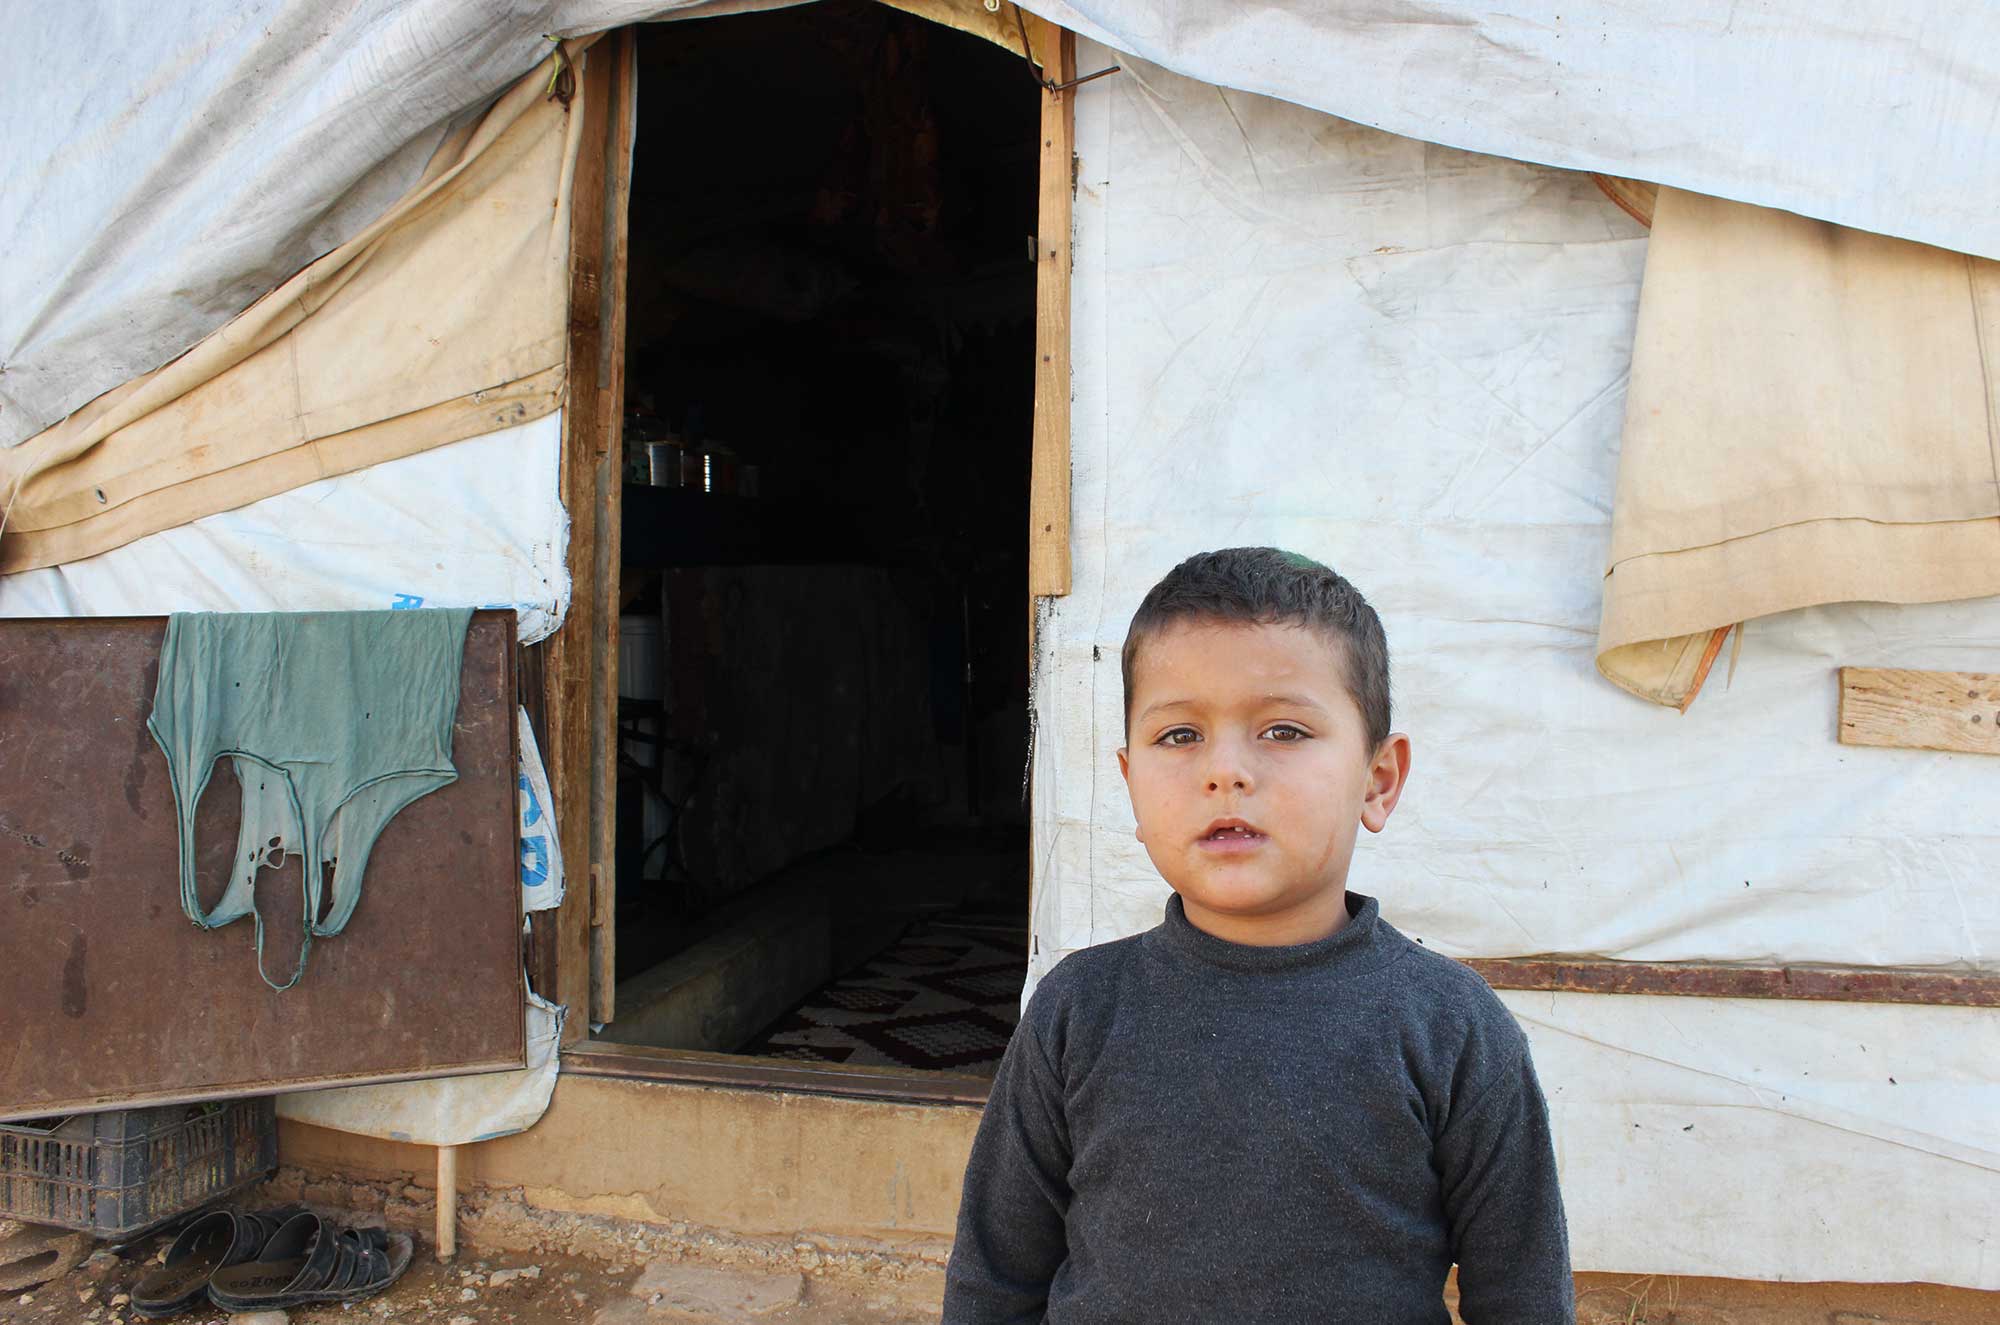 A young Syrian boy stands outside of his temporary home in Lebanon's Akkar region. Akkar is the poorest region in Lebanon & its population has grown by 50% since the start of the Syrian war.